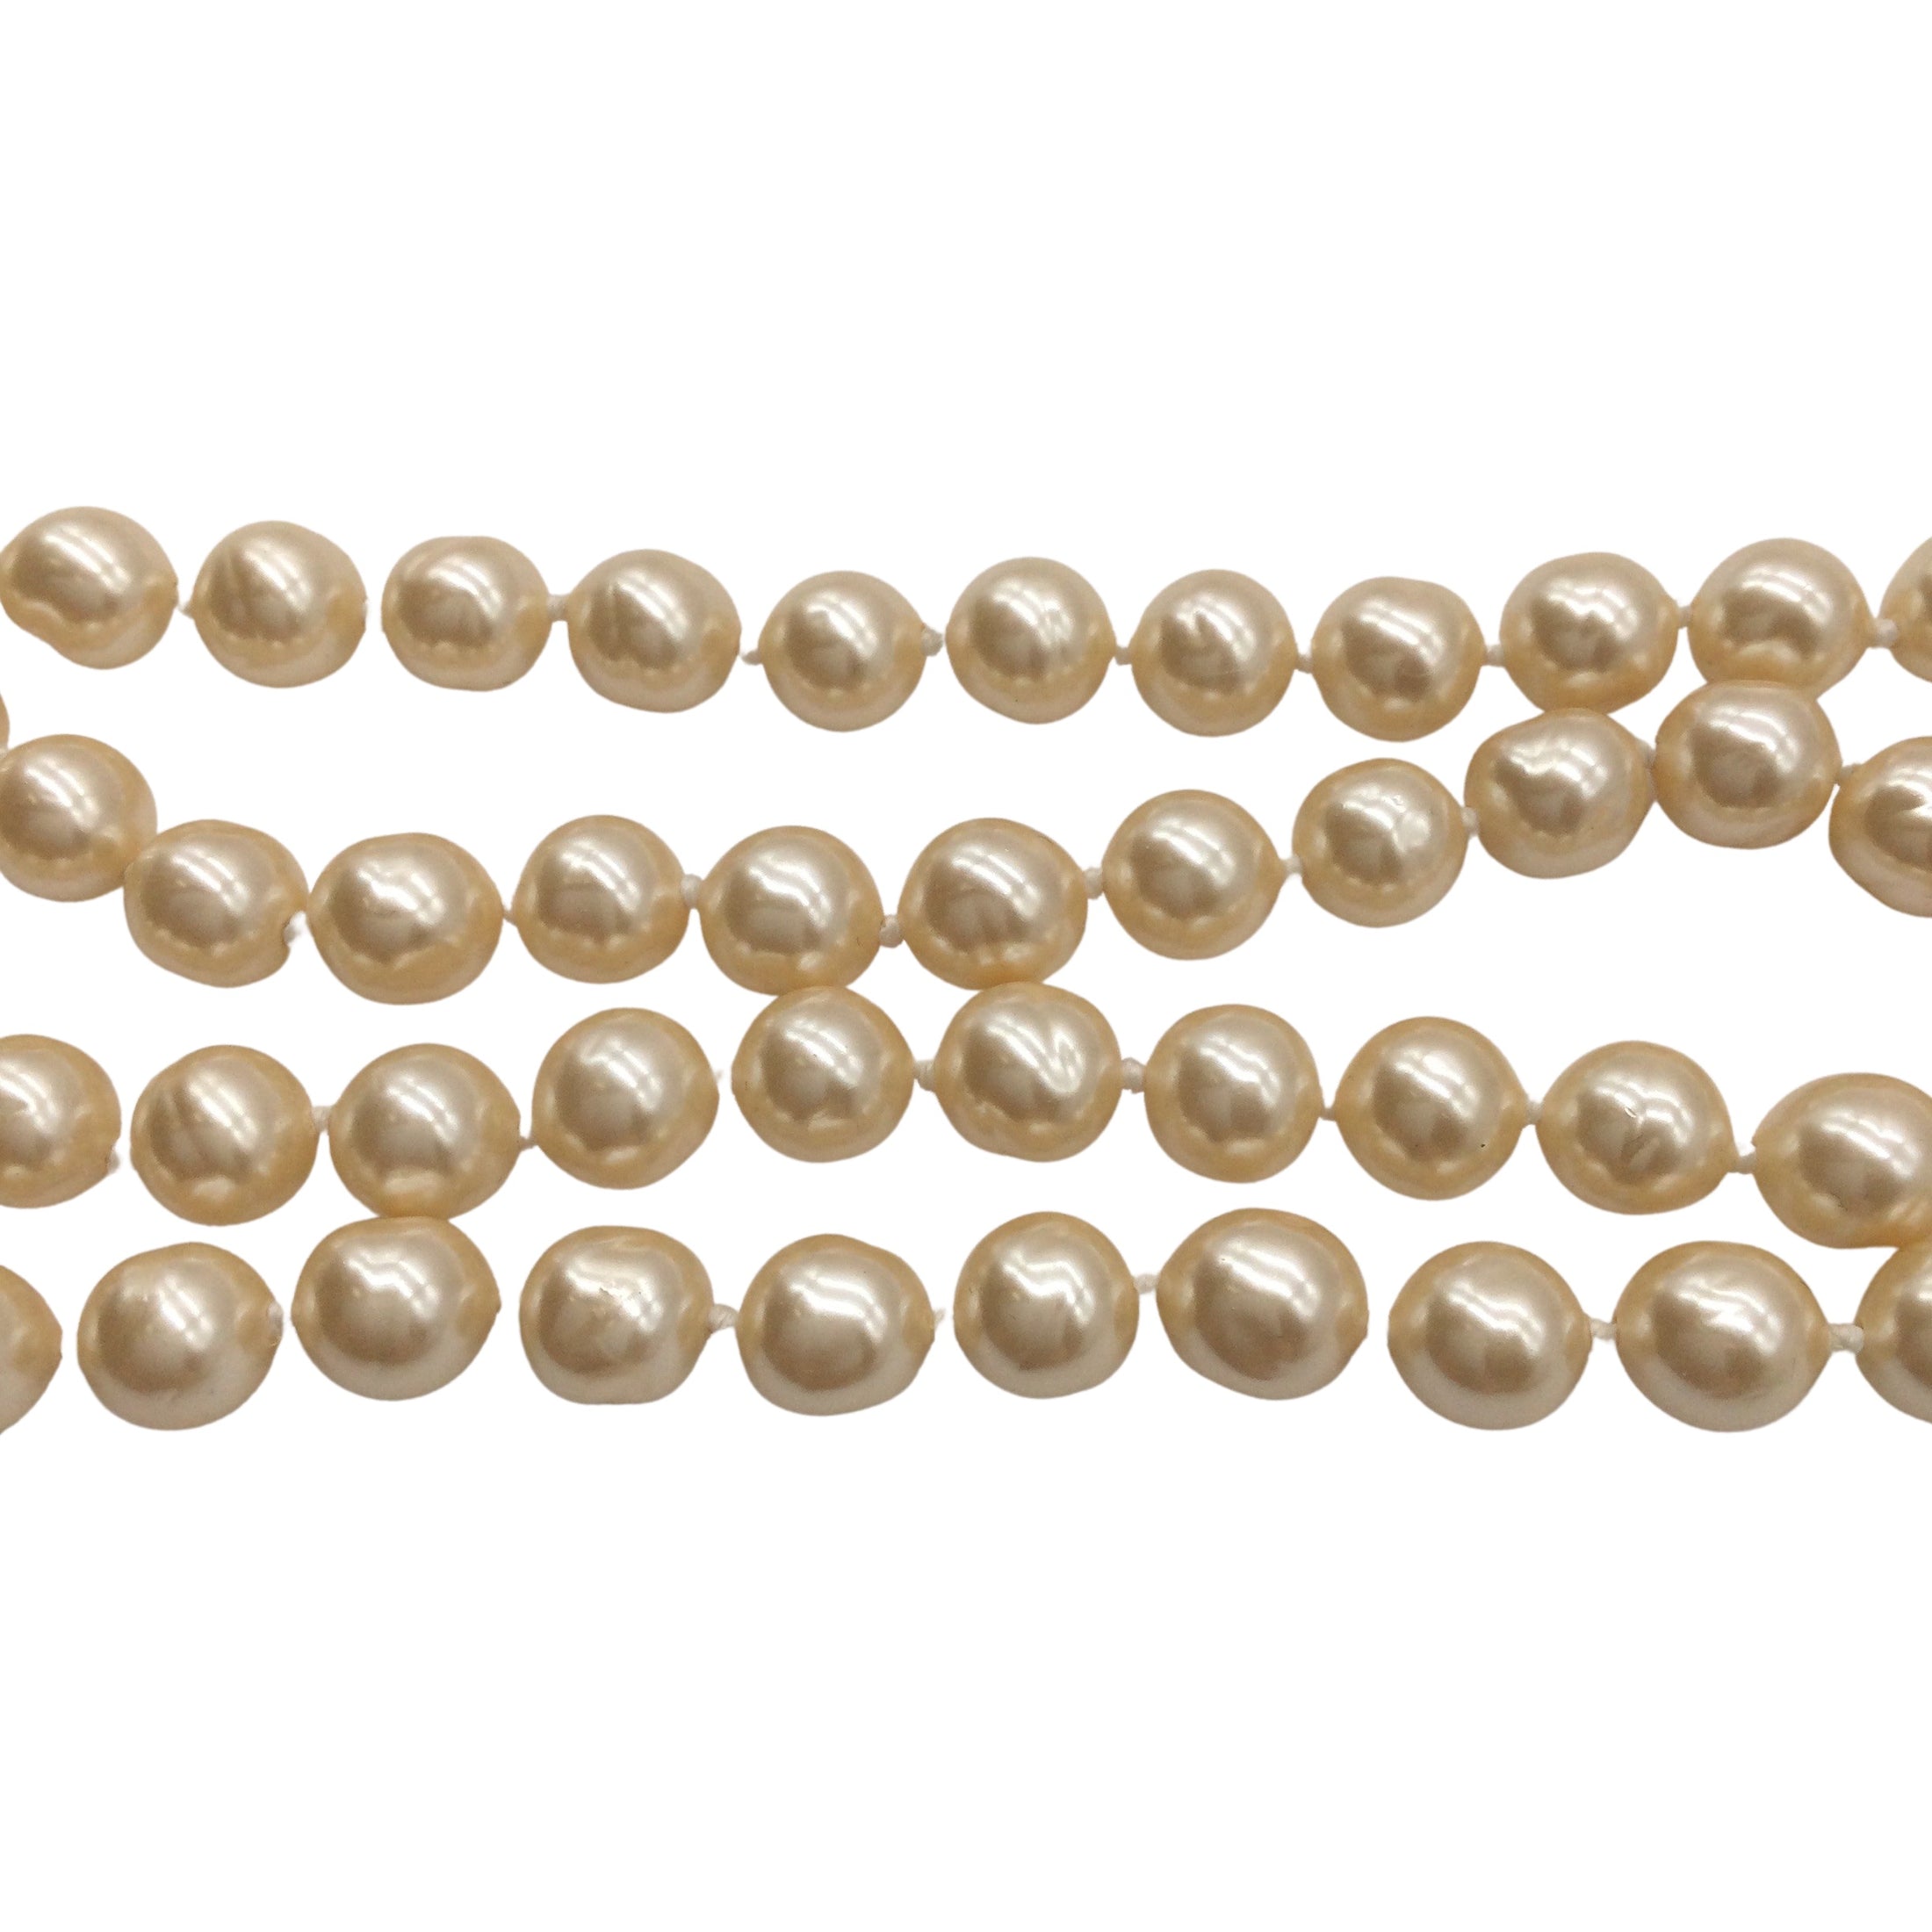 Chanel Cream Vintage 1981 Classic Extra Long Pearl Necklace